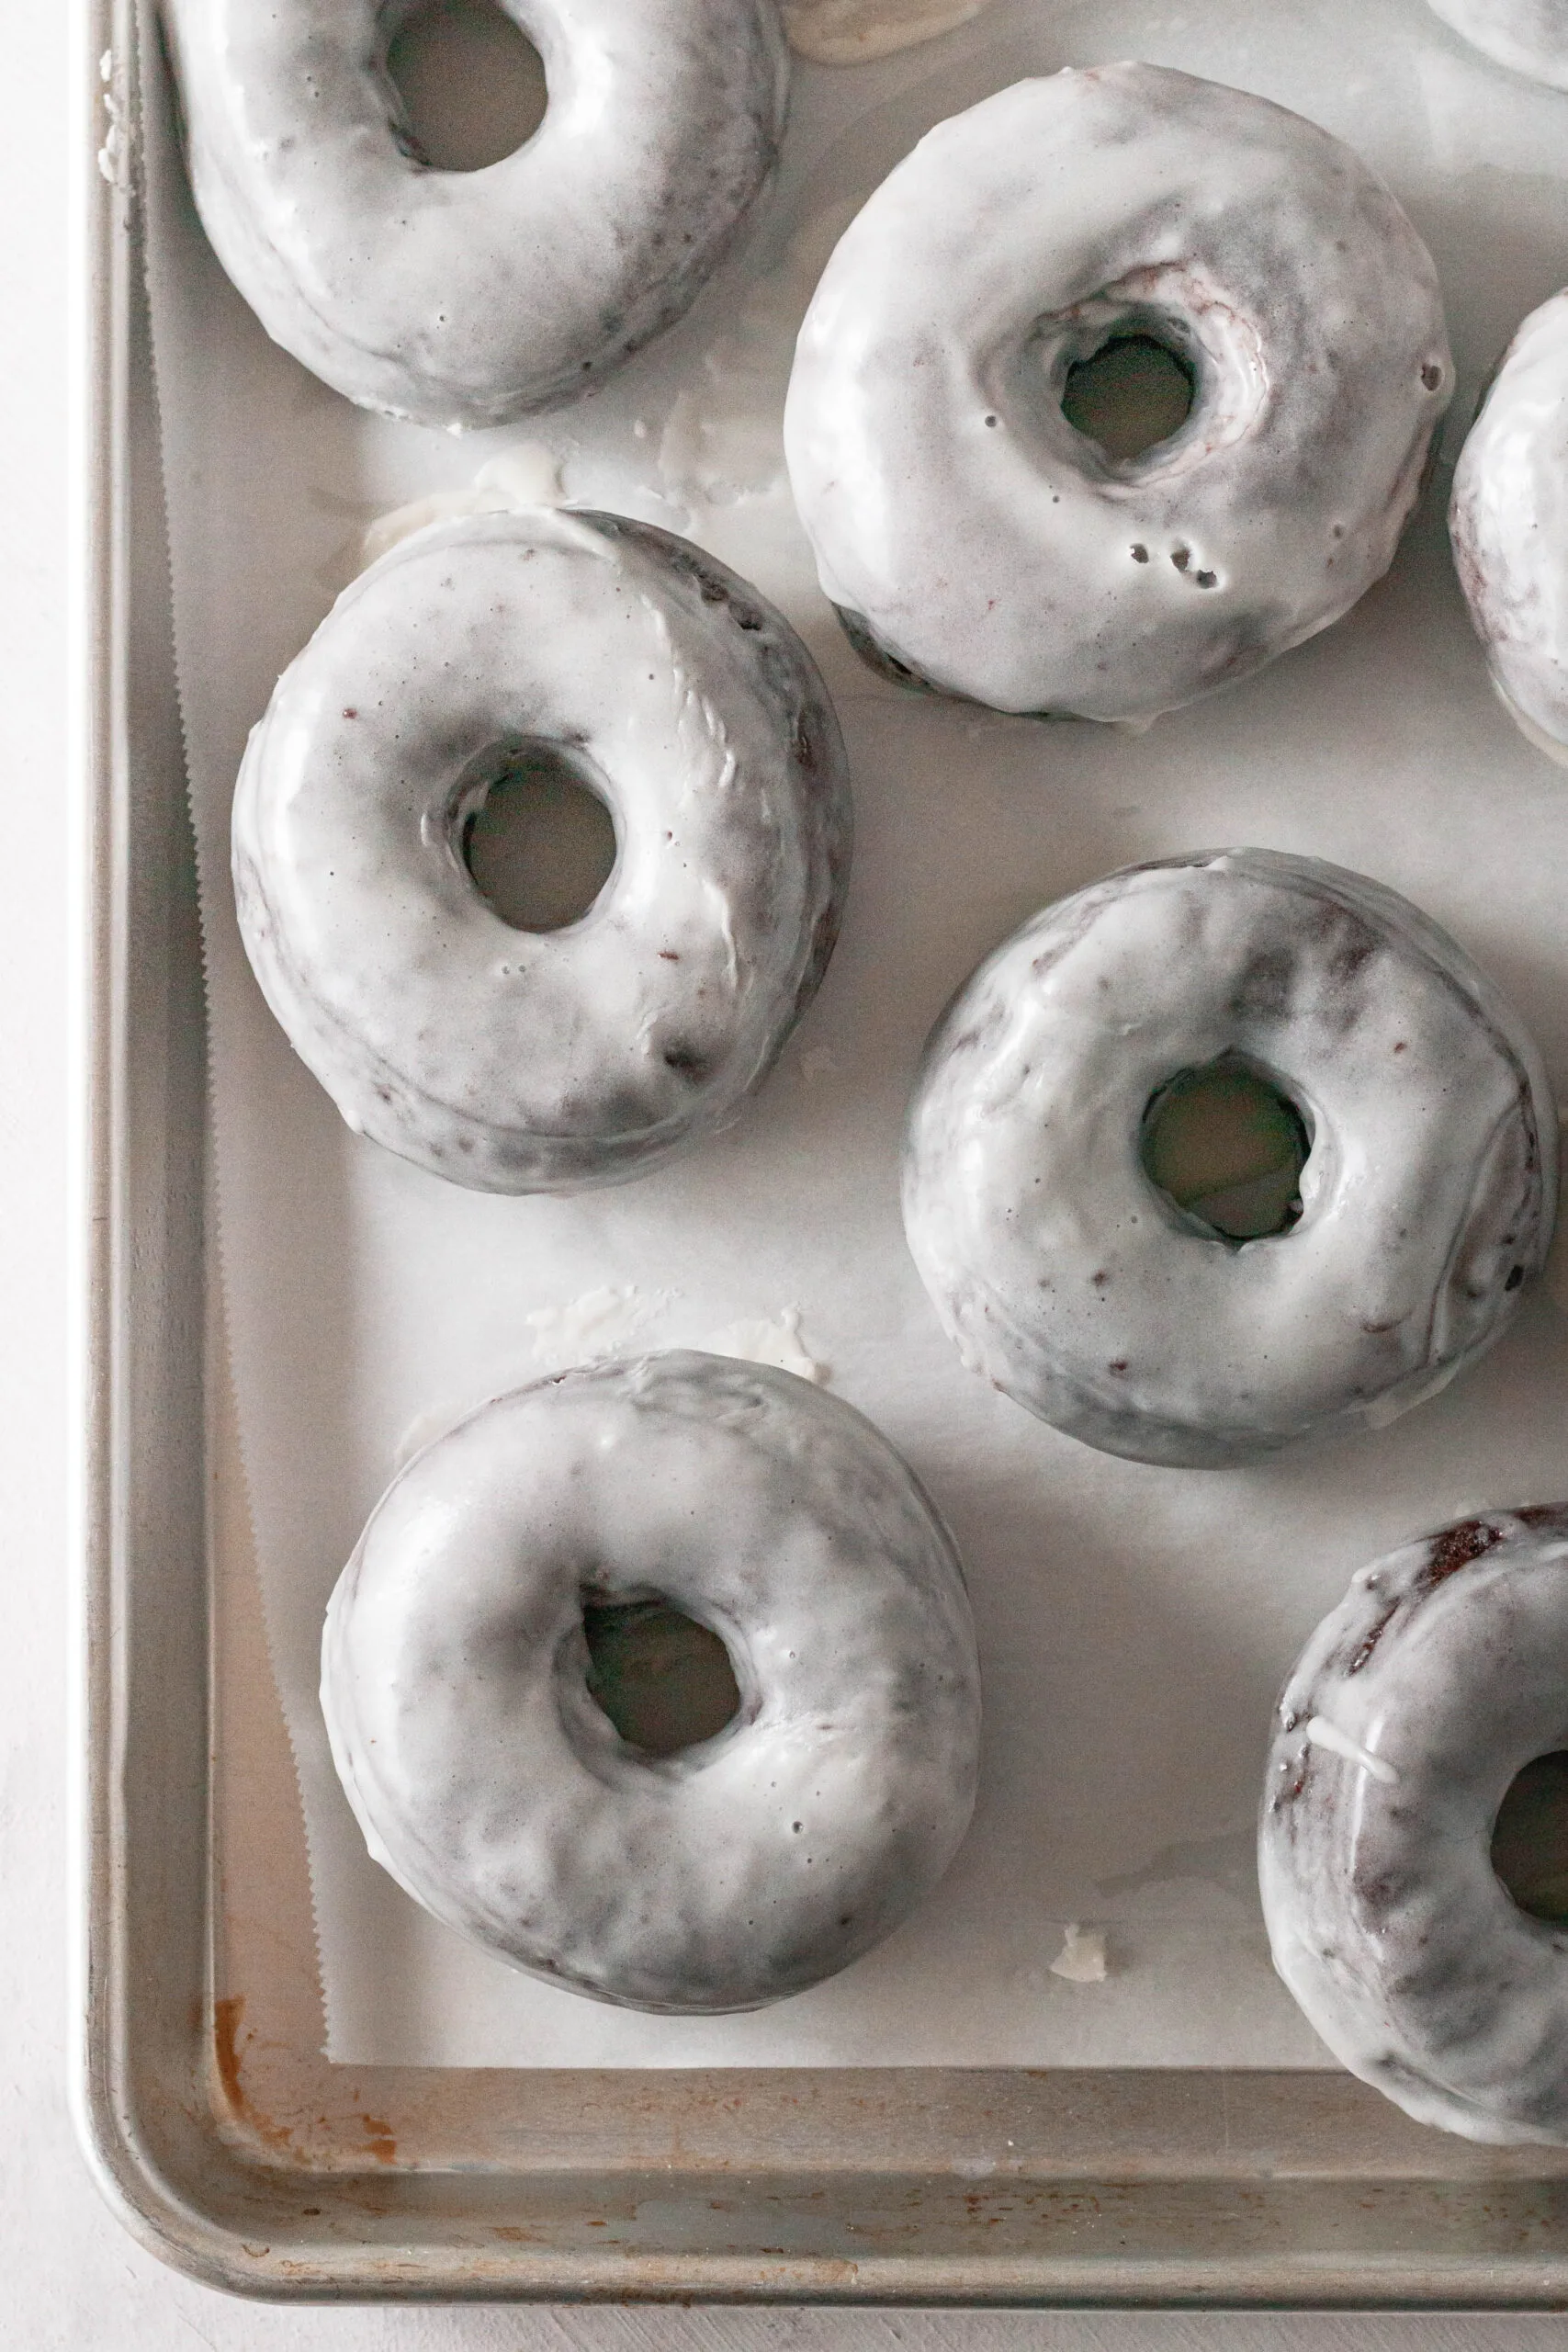 top view of the glazed donuts setting on a baking sheet